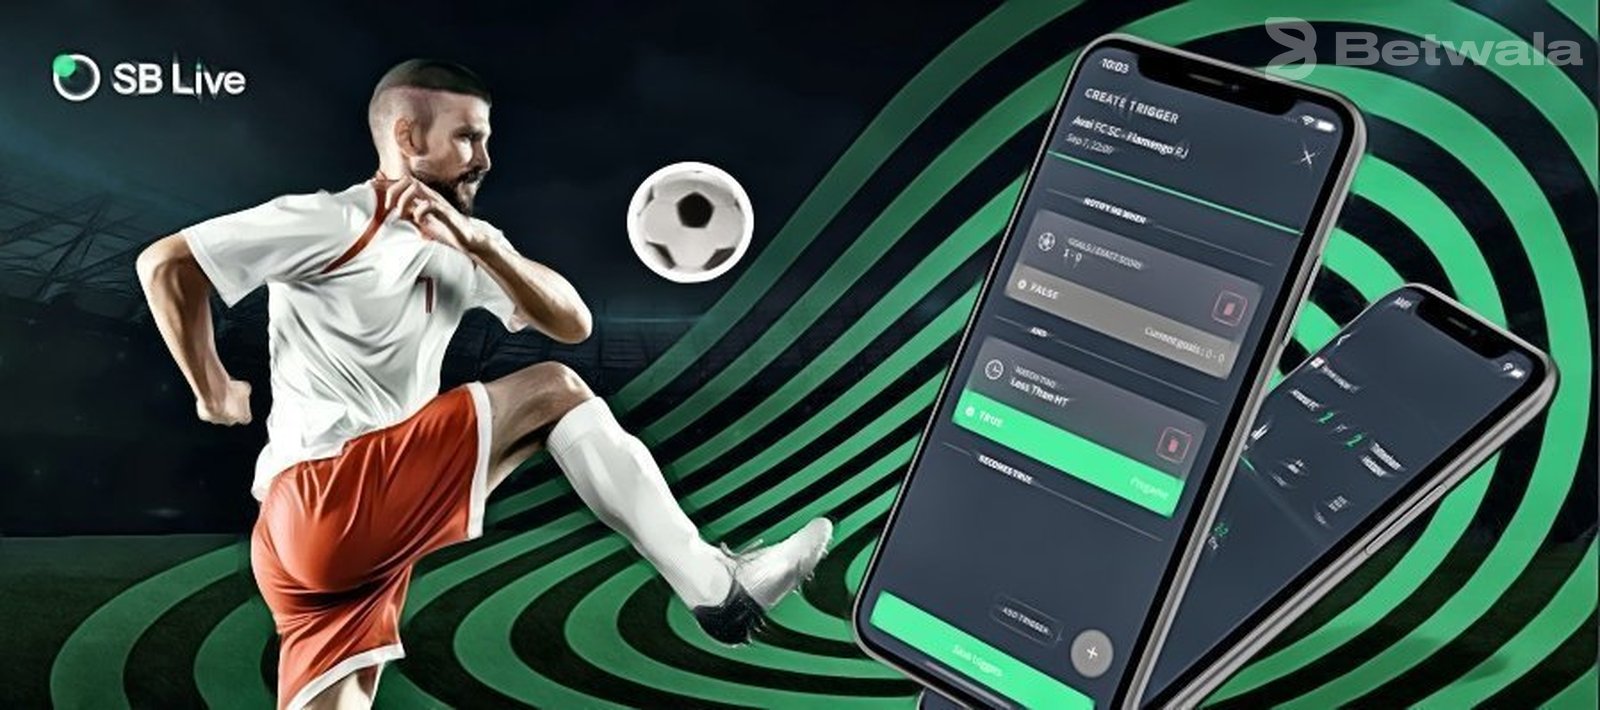 Td sports betting mobile best cryptocurrency social media groups